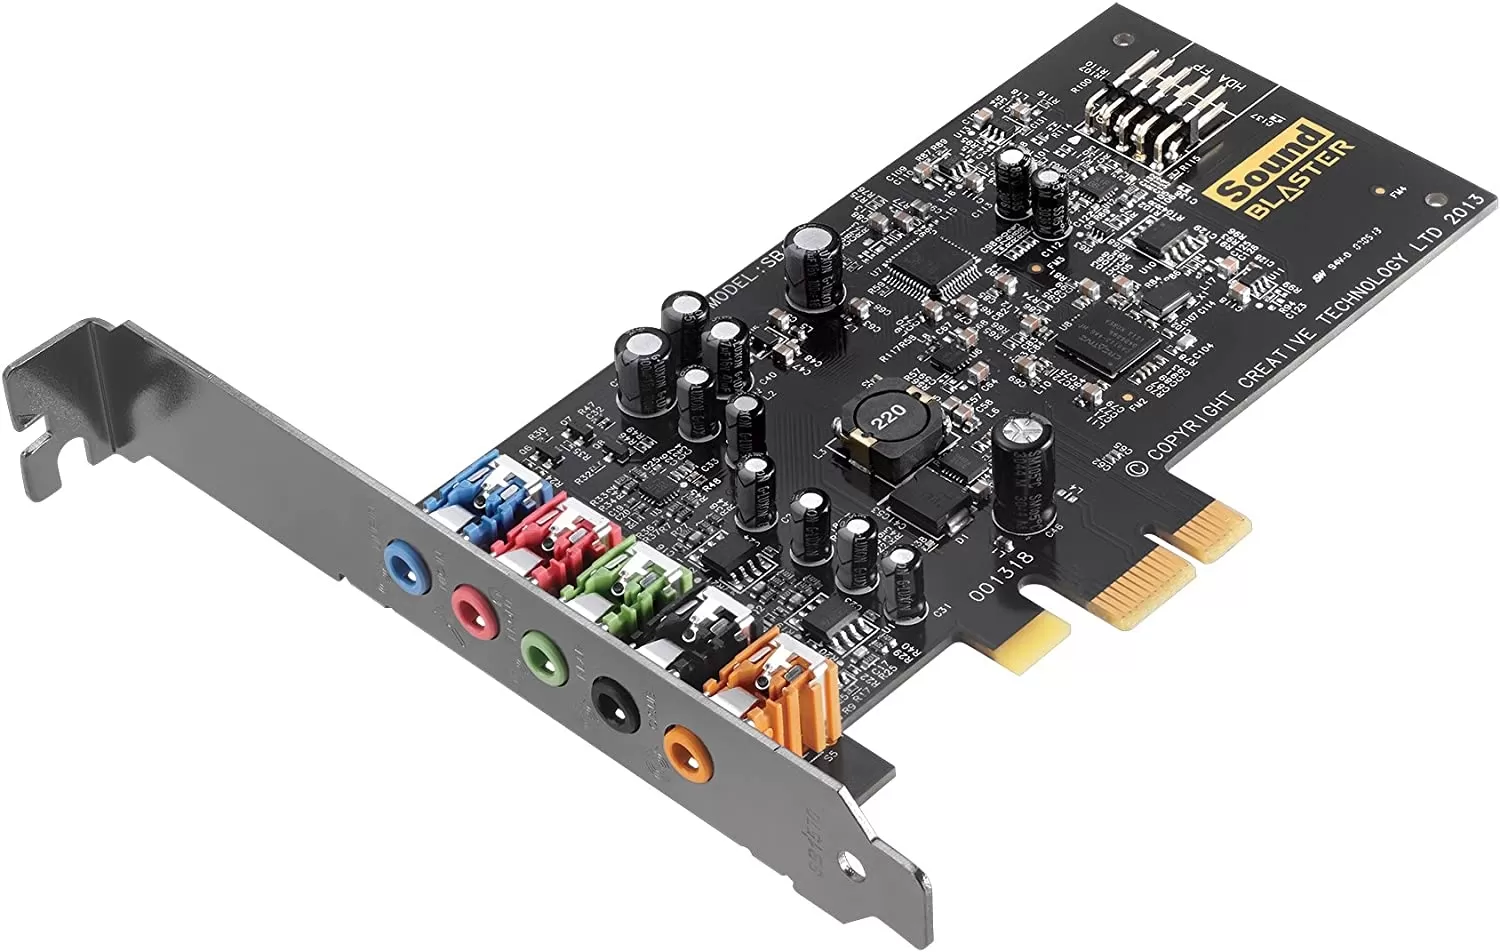 5.1 PCIe Sound Card with SBX Pro Studio